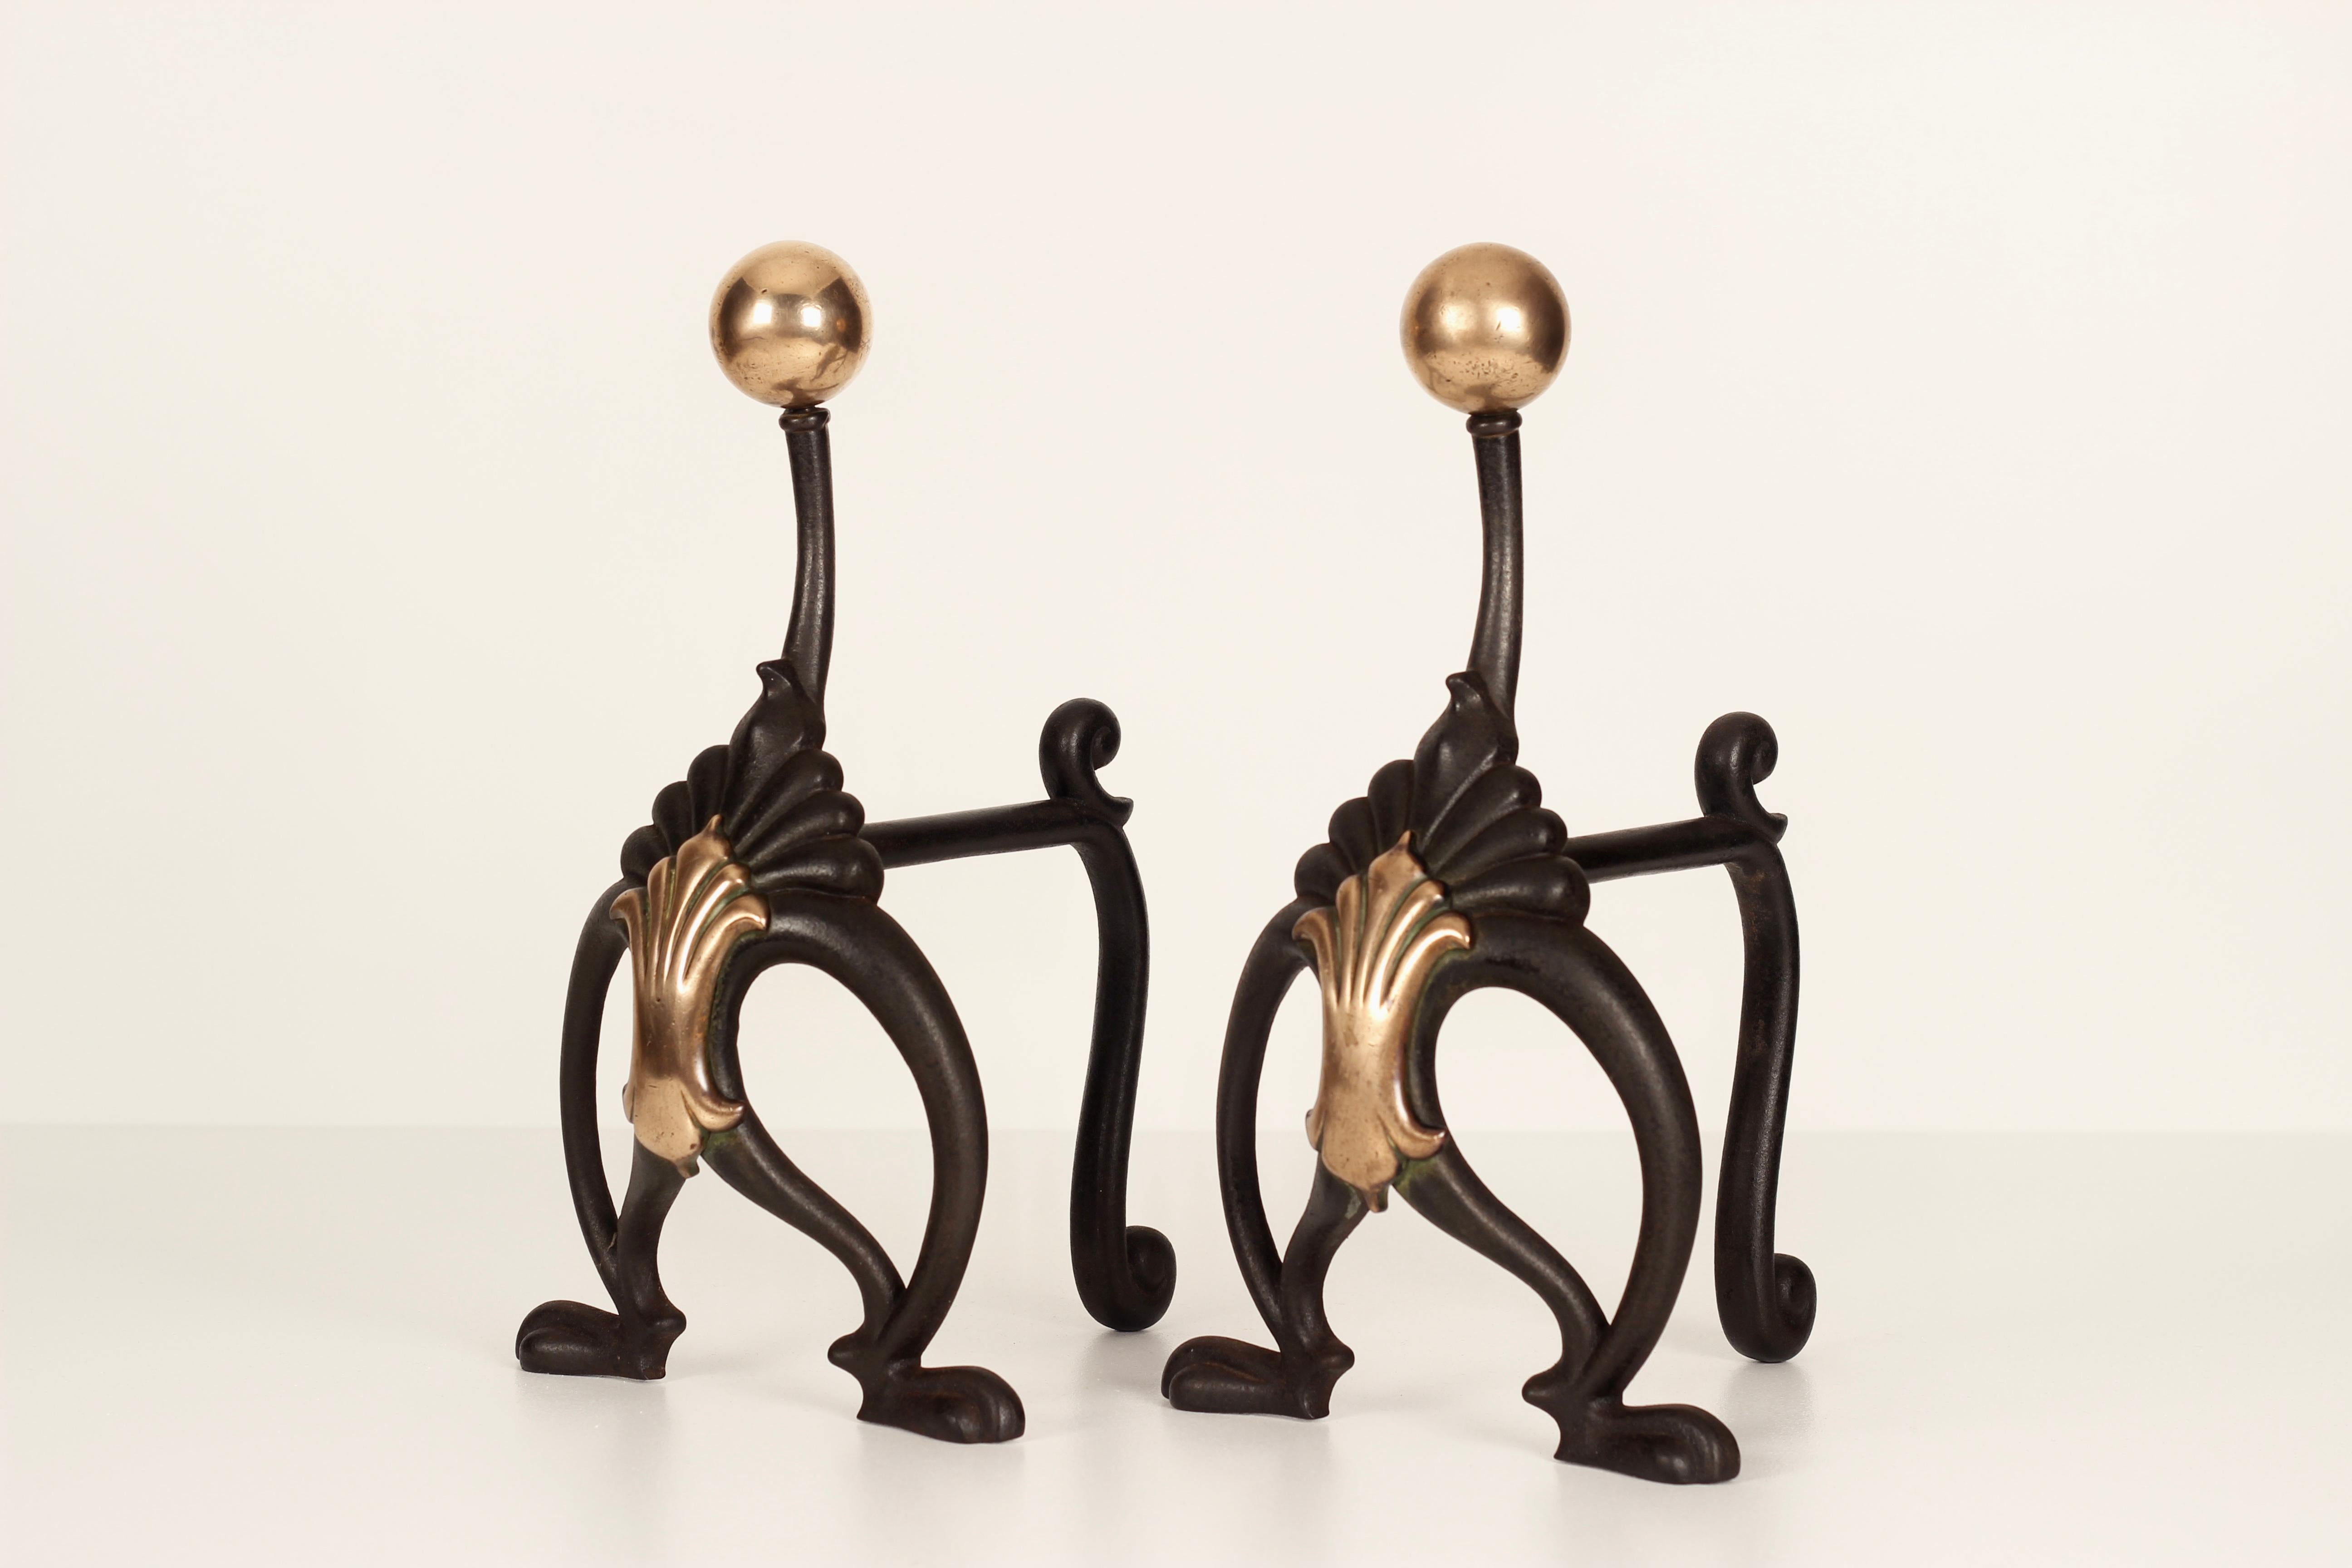 A pair of Art Nouveau fire dogs from the 1890-1910 period by the English maker WILLIAM TONKS & Sons. To us this pair resemble the stance of a bird or specifically a Peacock.
Made from Brass and iron, these fire dogs have copper roundels which